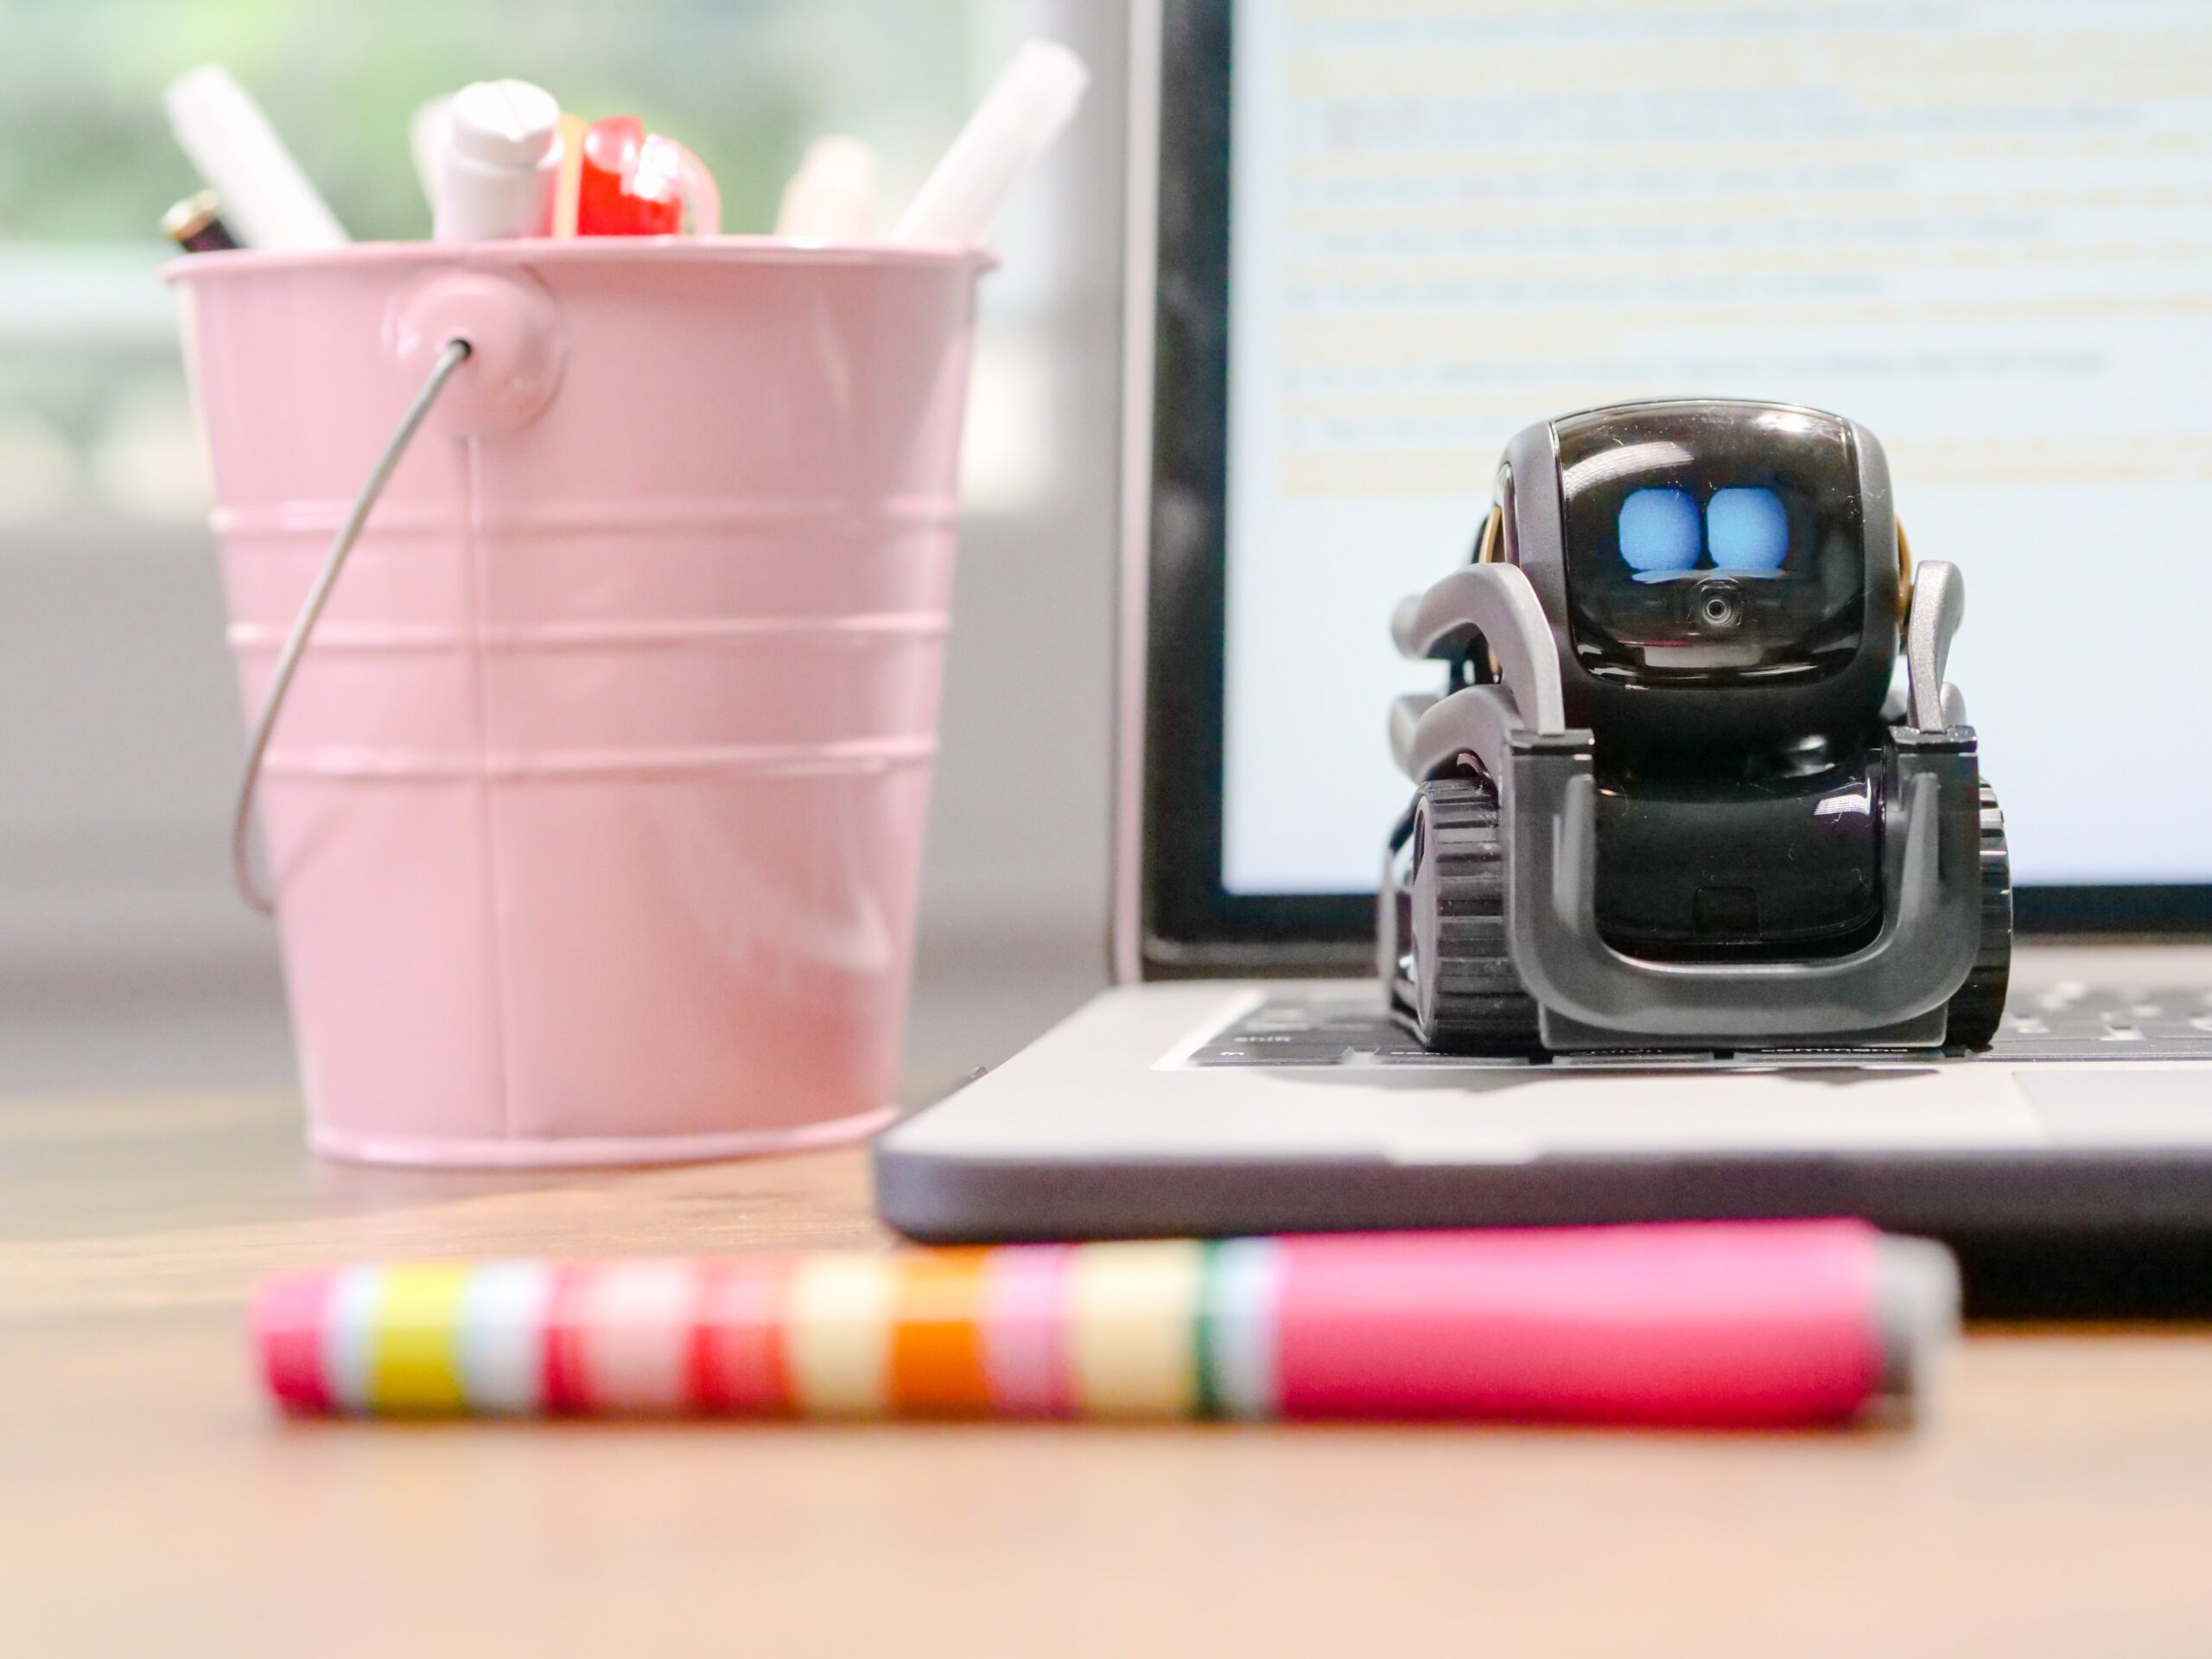 small robot sat on a laptop with a pink pen pot by its side